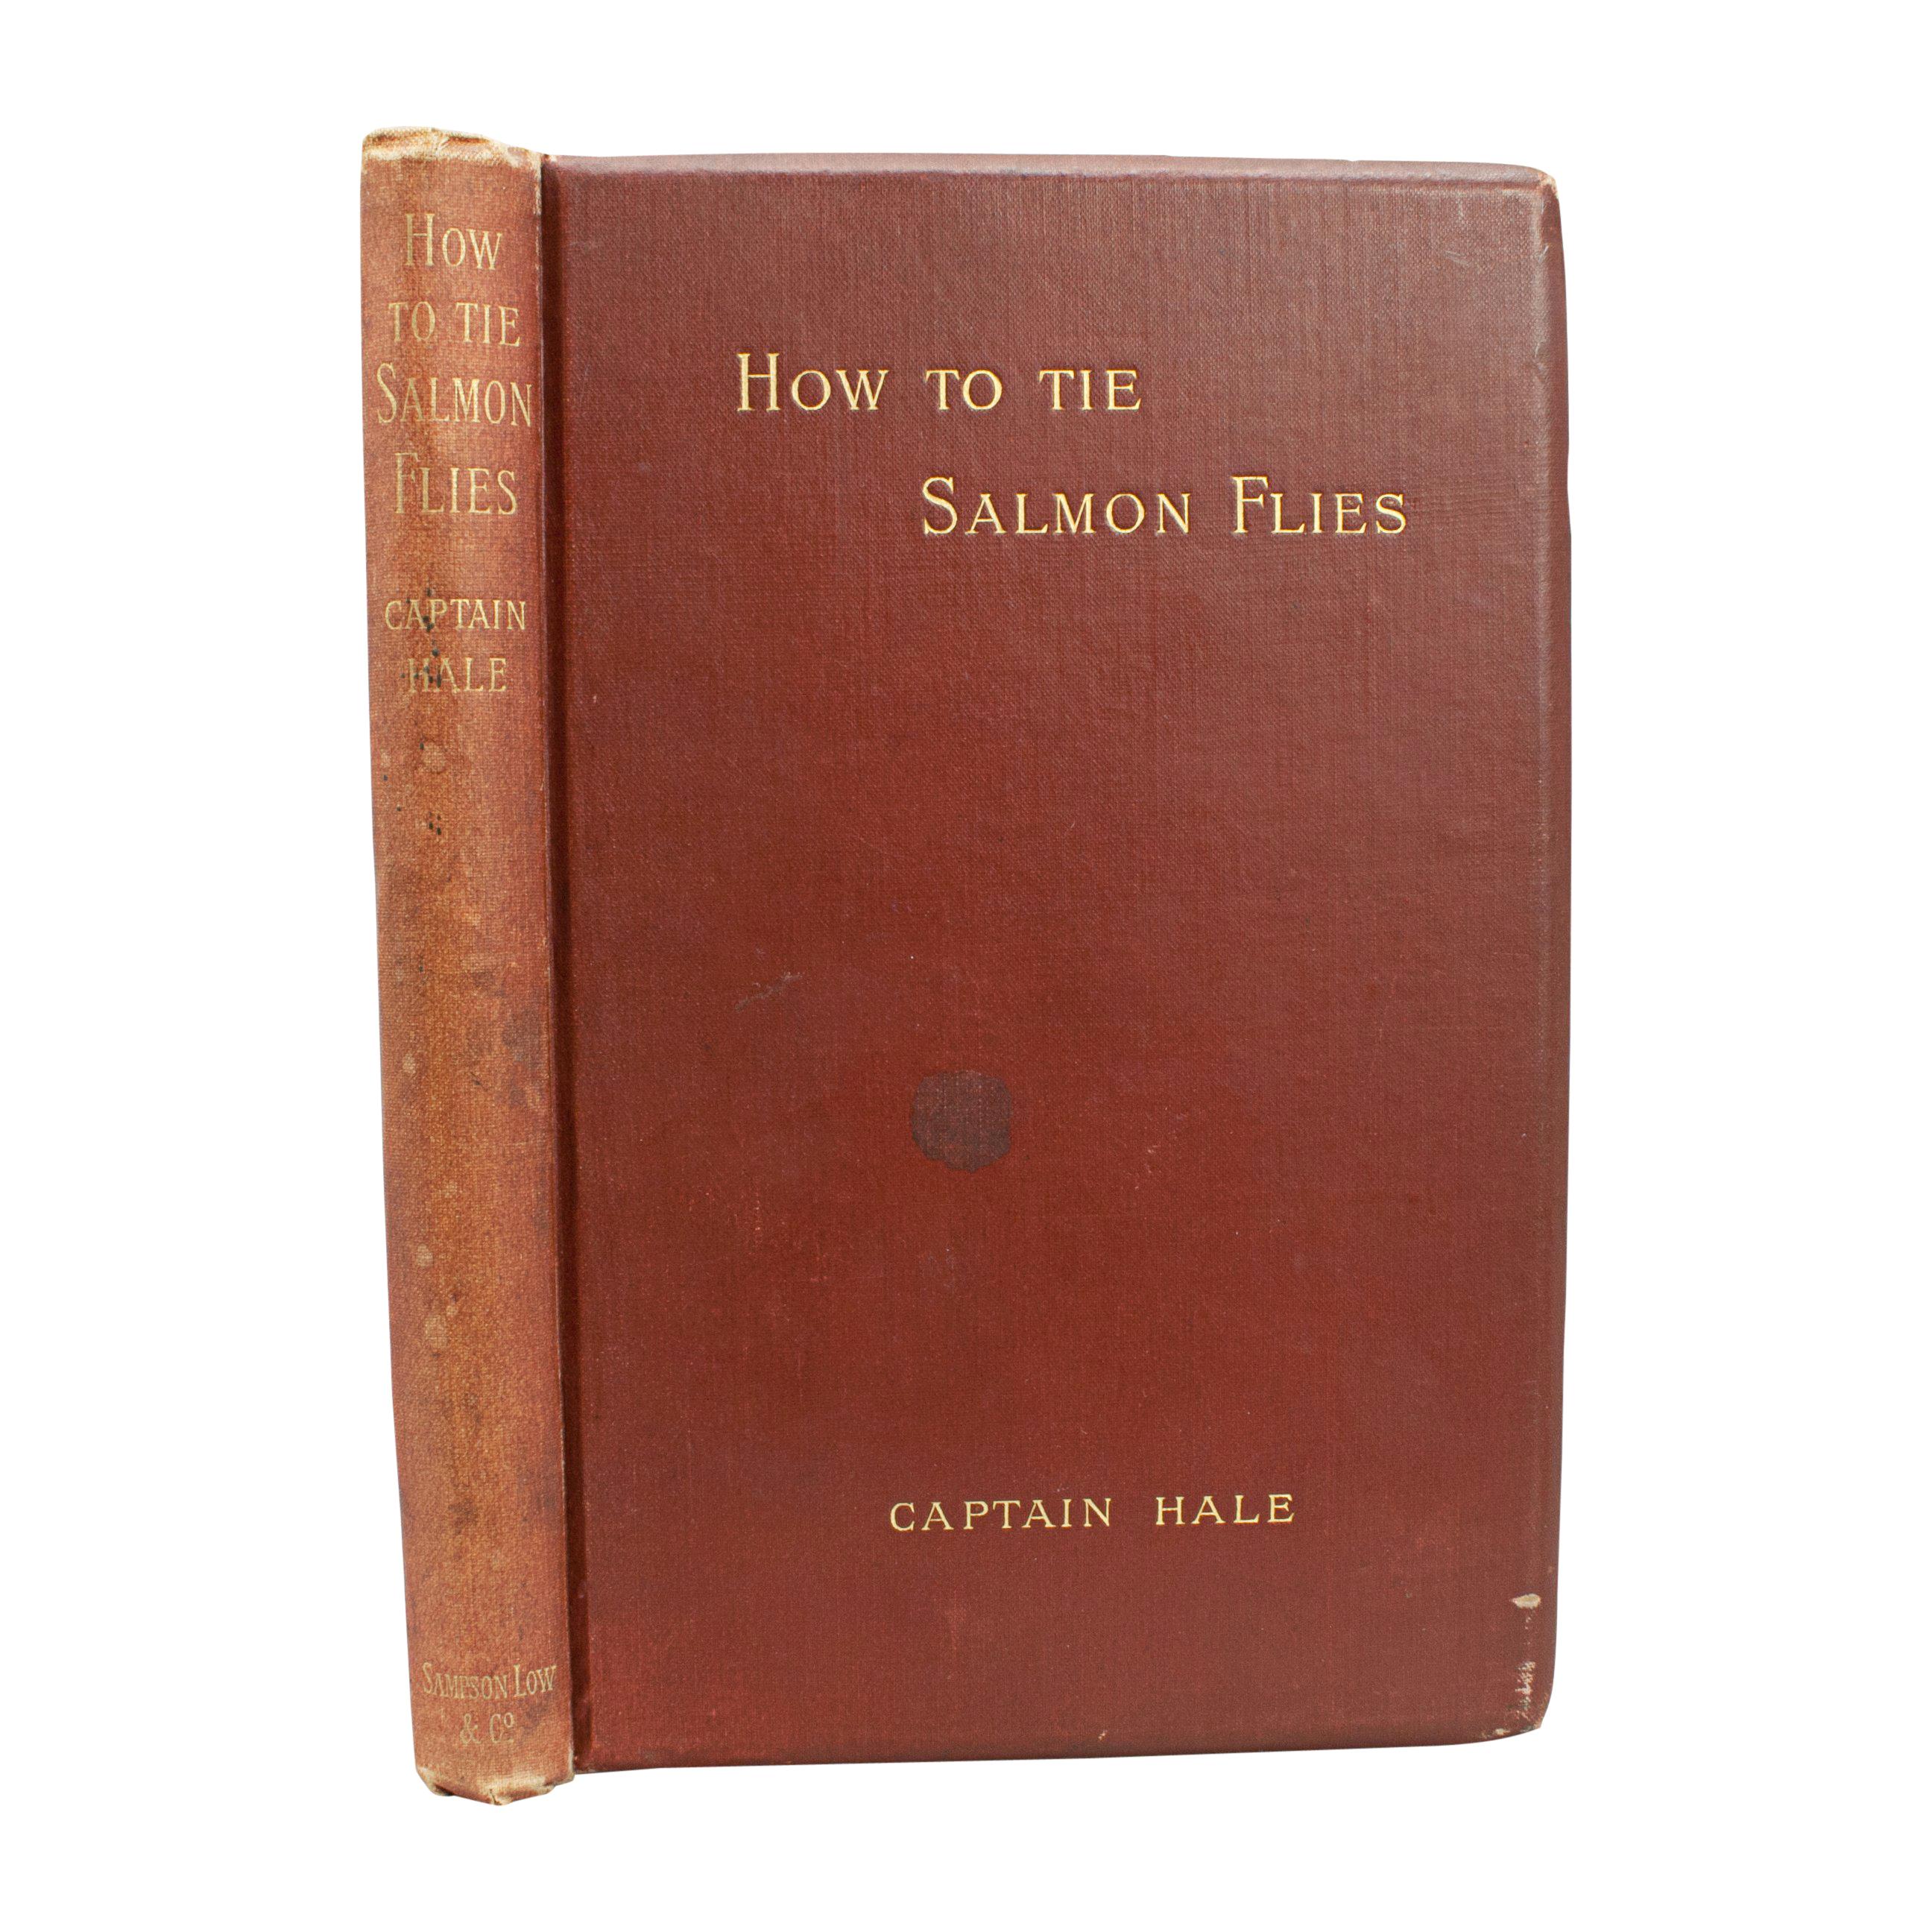 Vintage Fishing Book, How to Tie Salmon Flies by Captain Hale